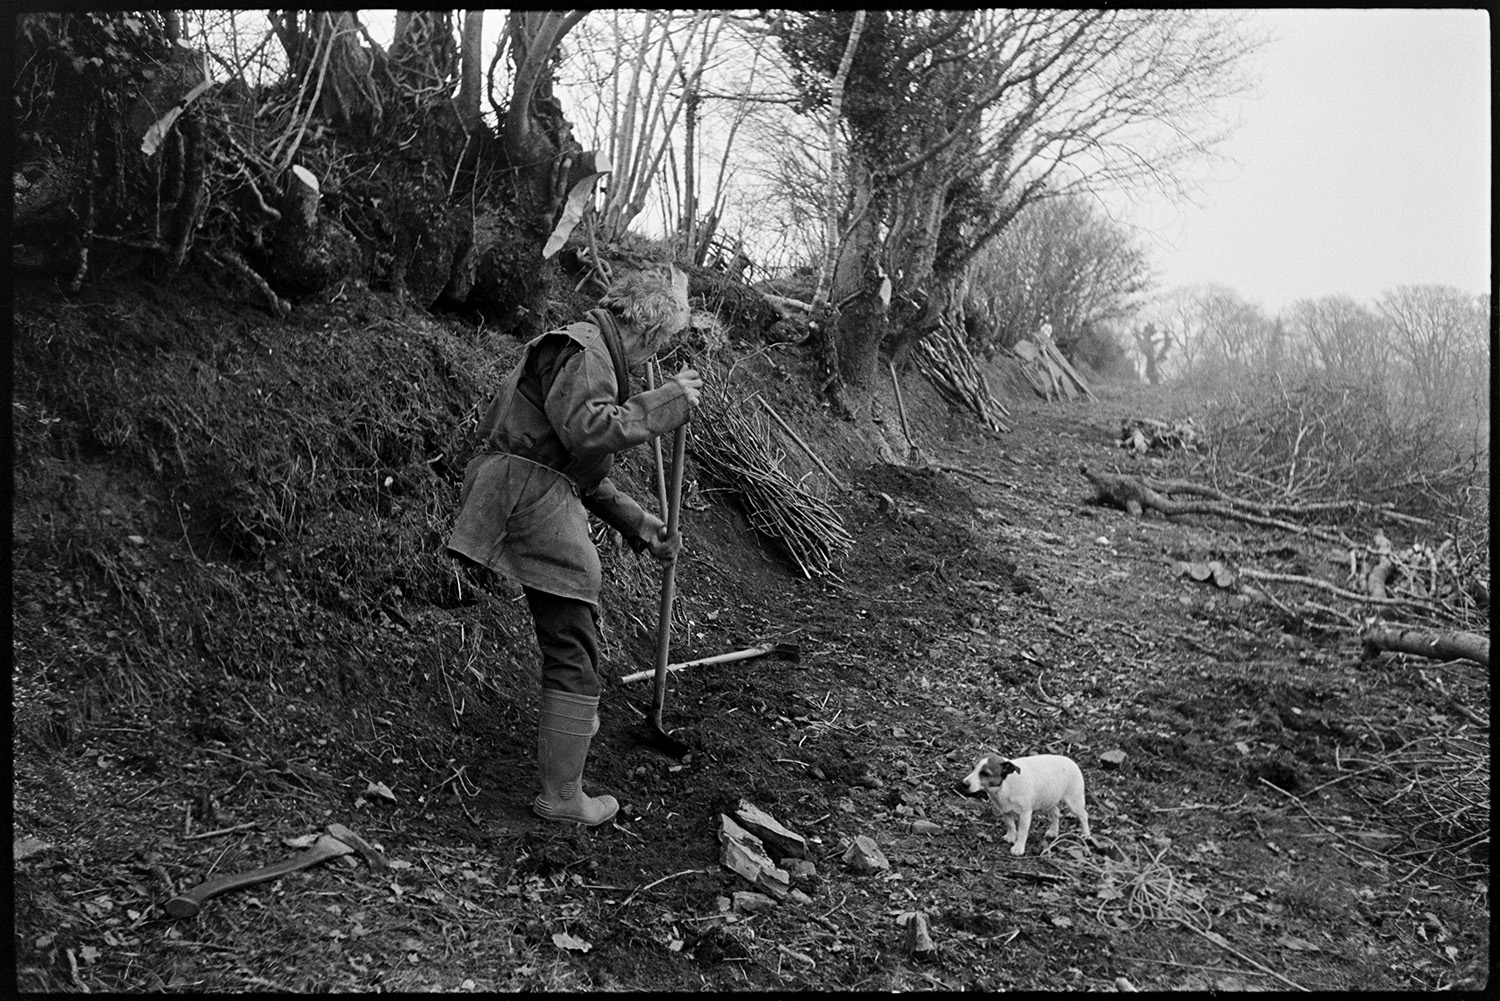 Man clatting, building up old hedgebank, sitting in shelter with dog. 
[Fred Moule clatting or building up a hedgerow with turf, using a spade, at Woolridge, Dolton. A dog is watching him and various logs and branches from the hedge are on the ground nearby.]